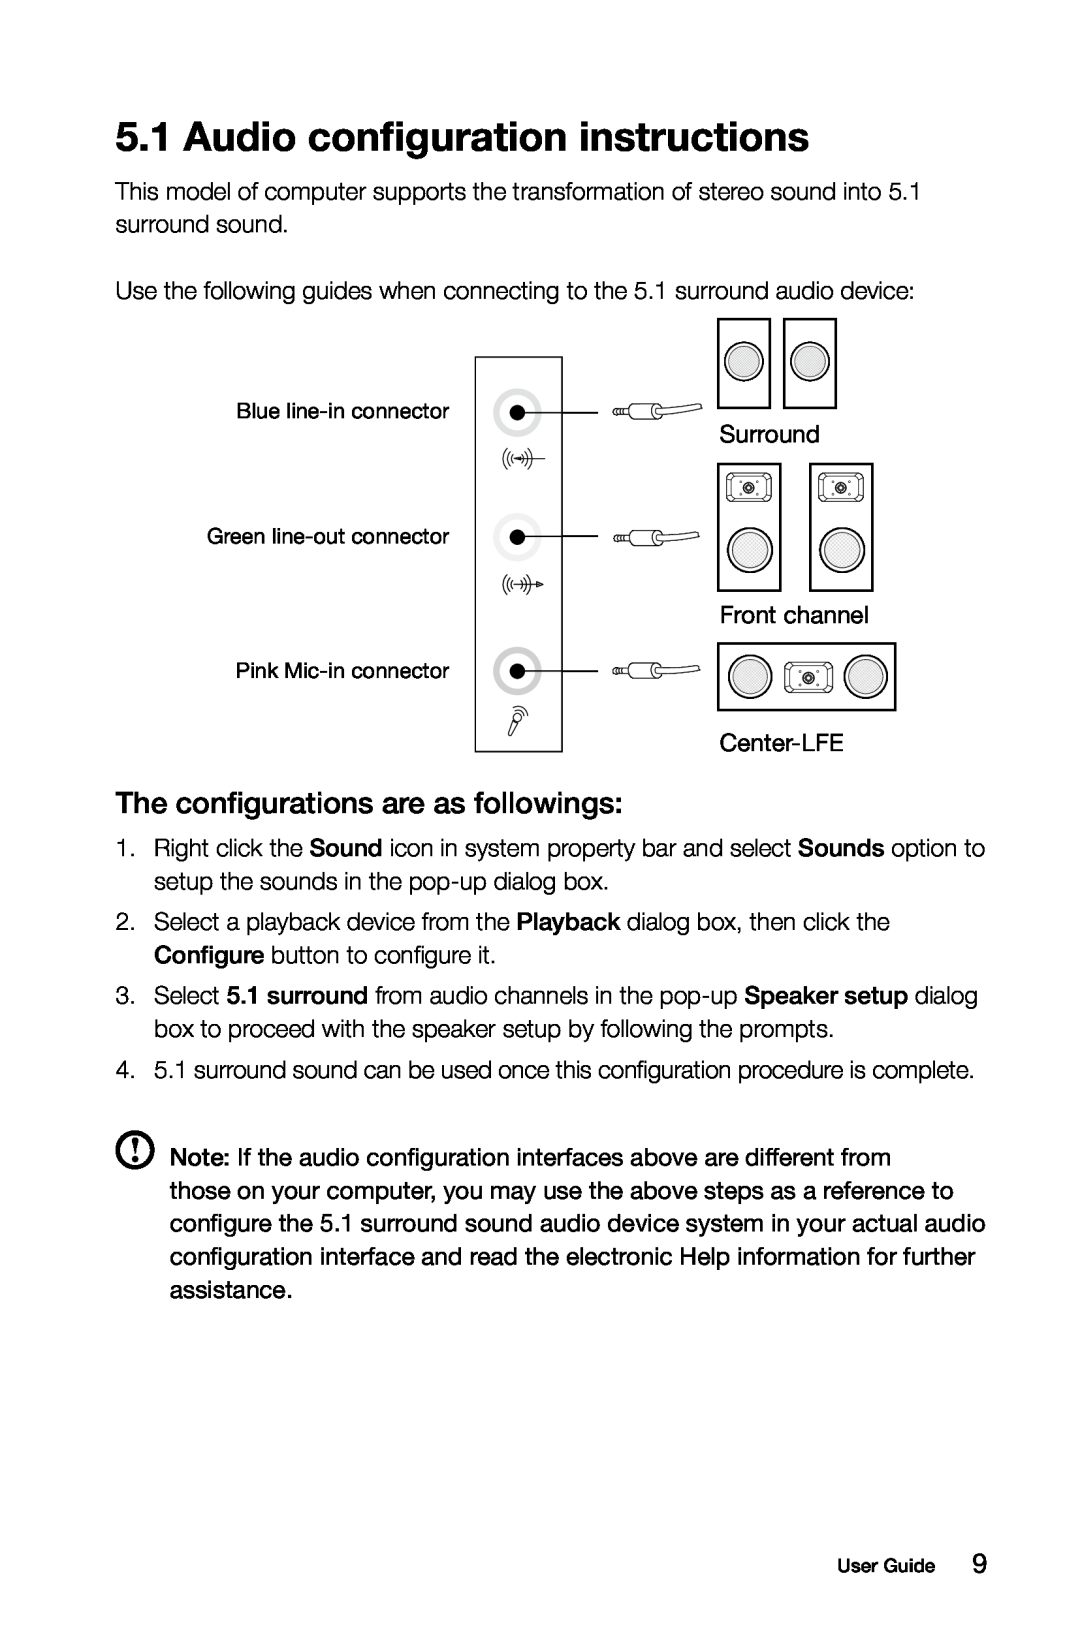 Lenovo 10090/2556/4748 [K415], 10121/90A1 [K450 ES] Audio configuration instructions, The configurations are as followings 